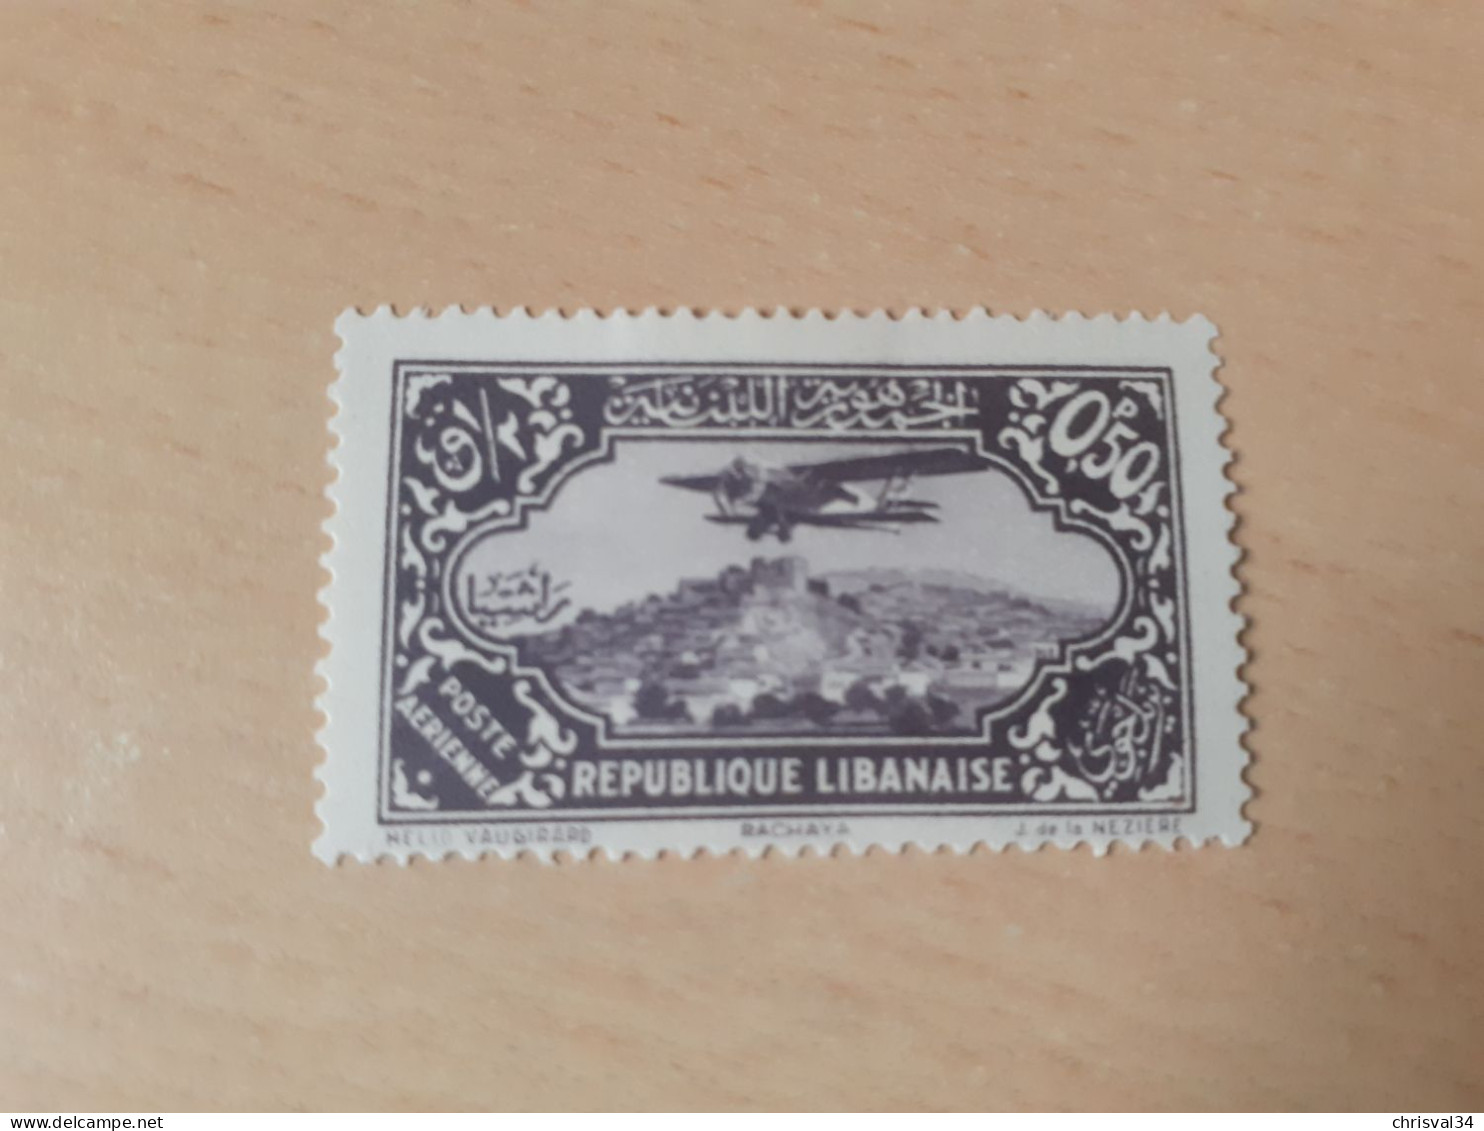 TIMBRE   GRAND  LIBAN    POSTE  AERIENNE   N  39      COTE  0,75  EUROS    NEUF  TRACE  CHARNIERE - Luftpost